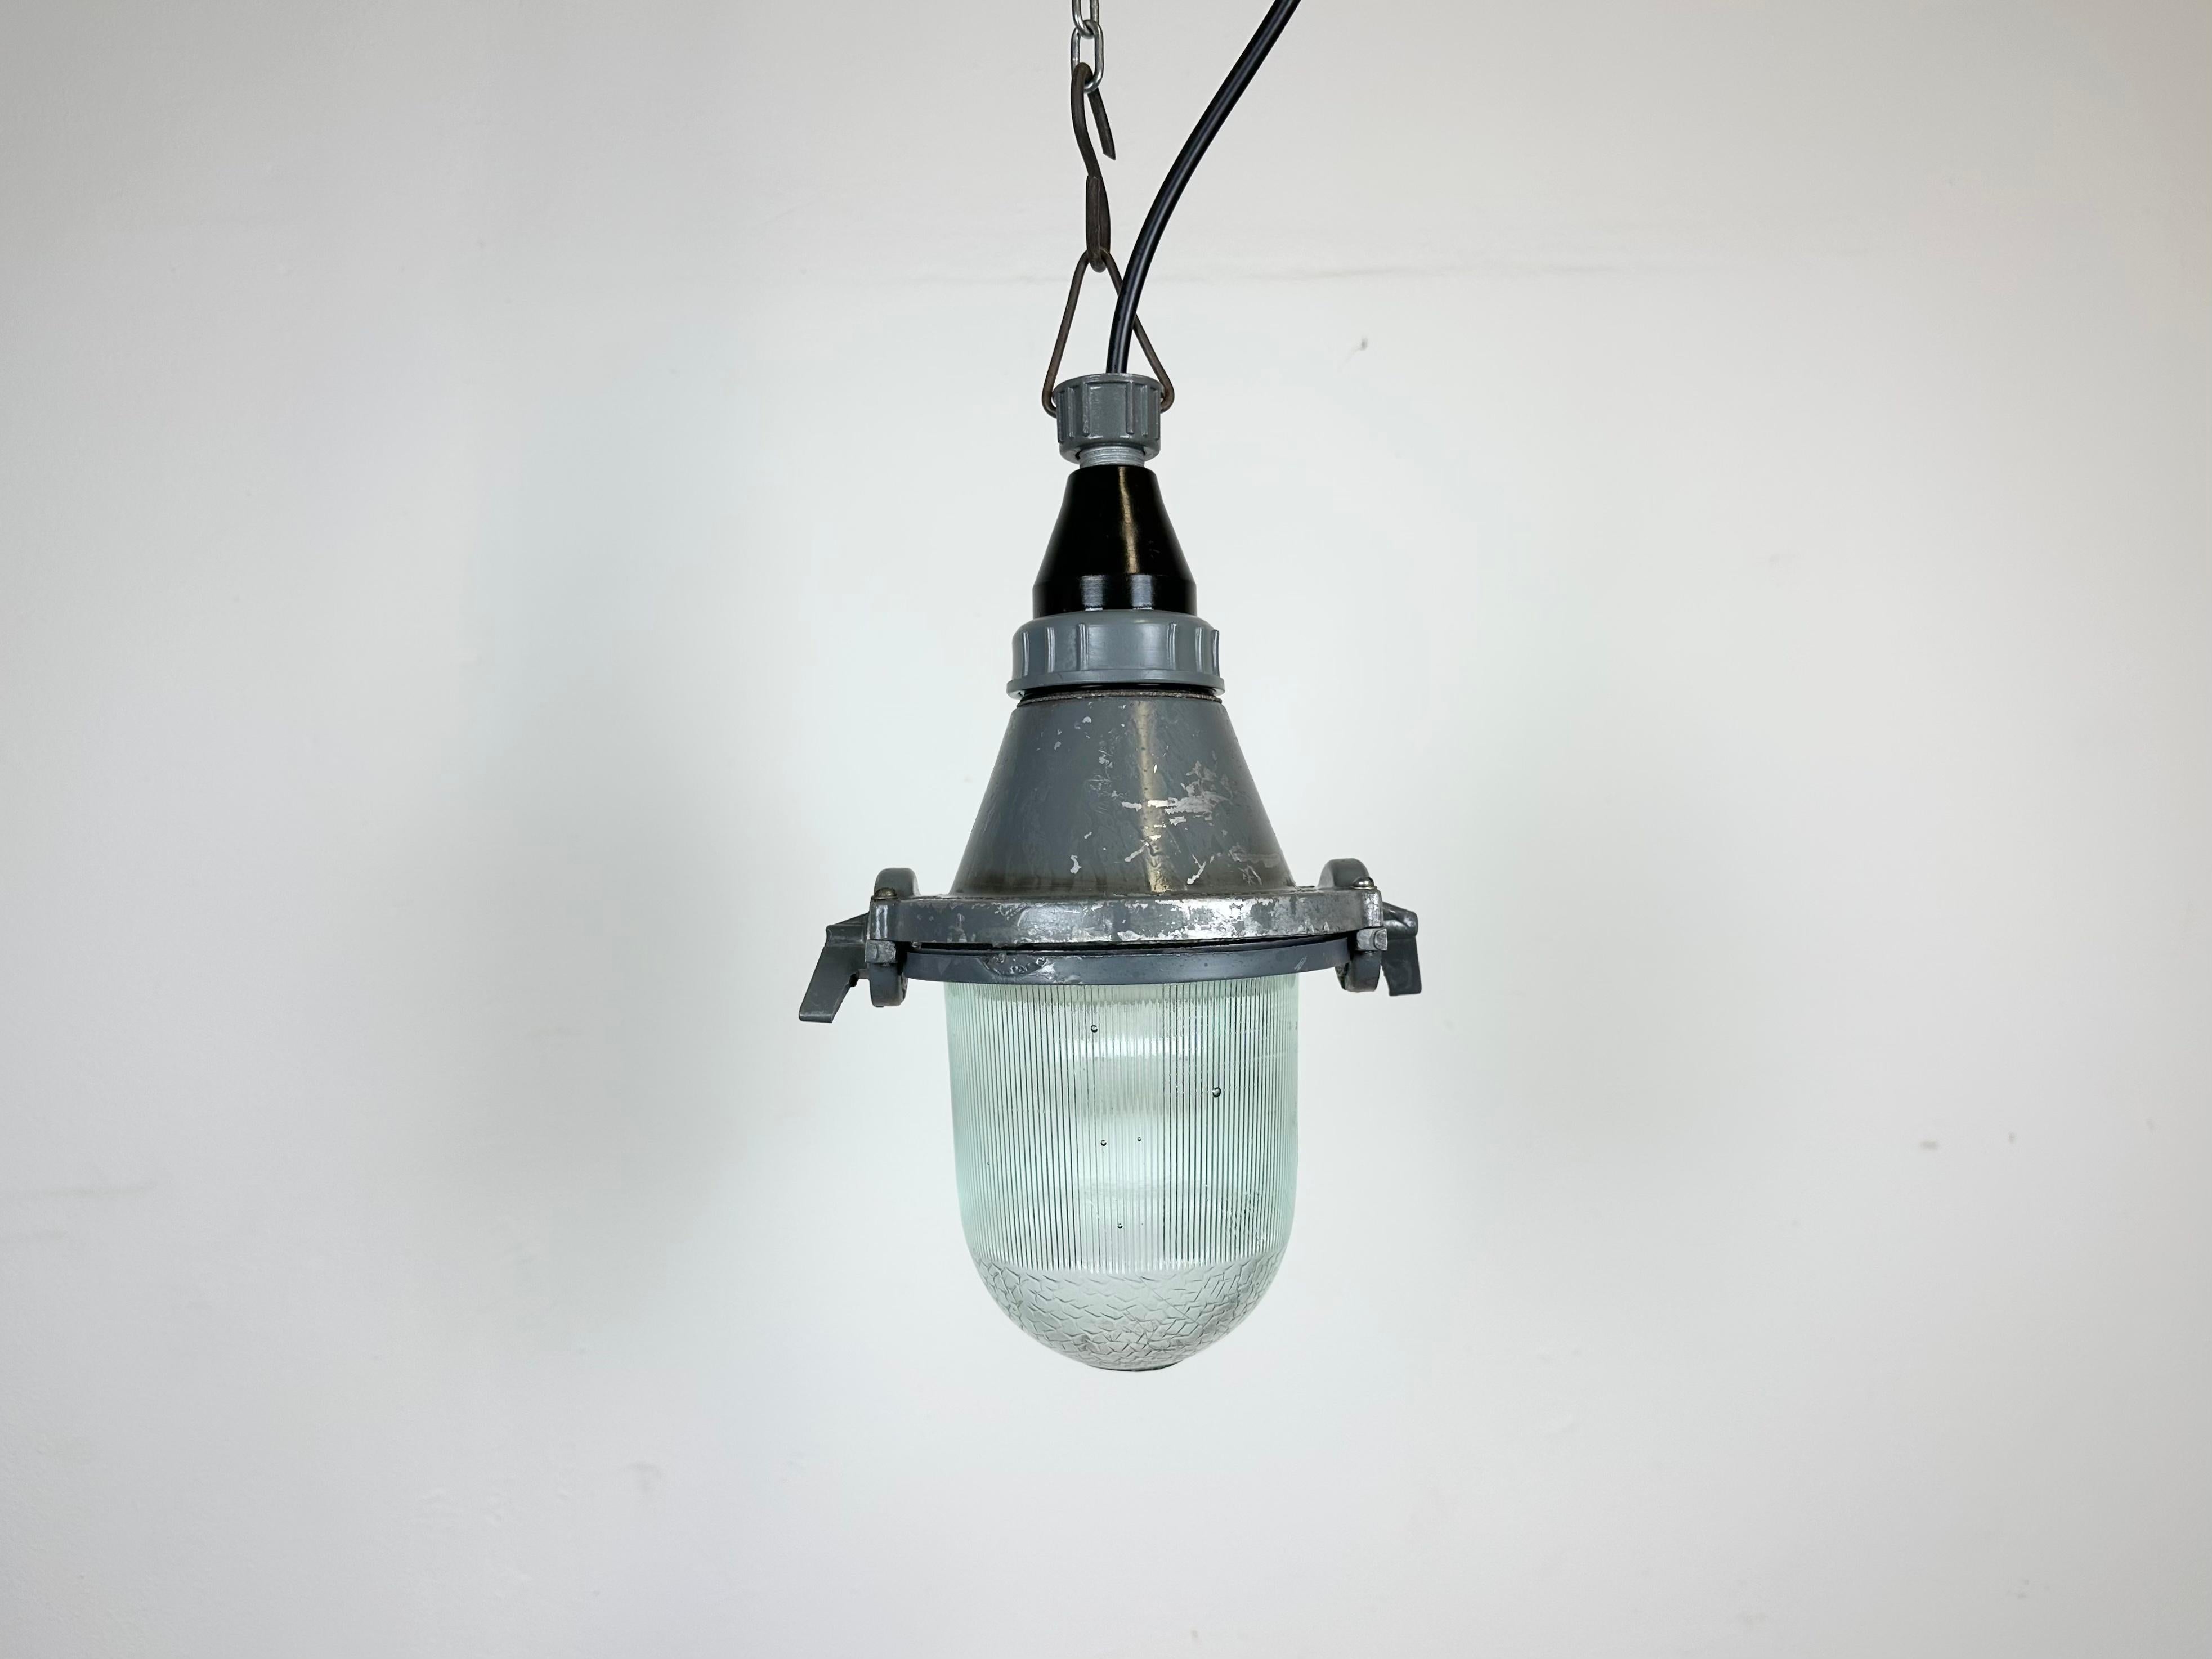 Grey industrial light with massive protective glass bulb. Made in former Soviet Union during the 1960s. It features cast aluminium body with bakelite top and clear glass cover. The socket requires E27 lightbulbs. Newly wired. Measure: weight: 1.6 kg.